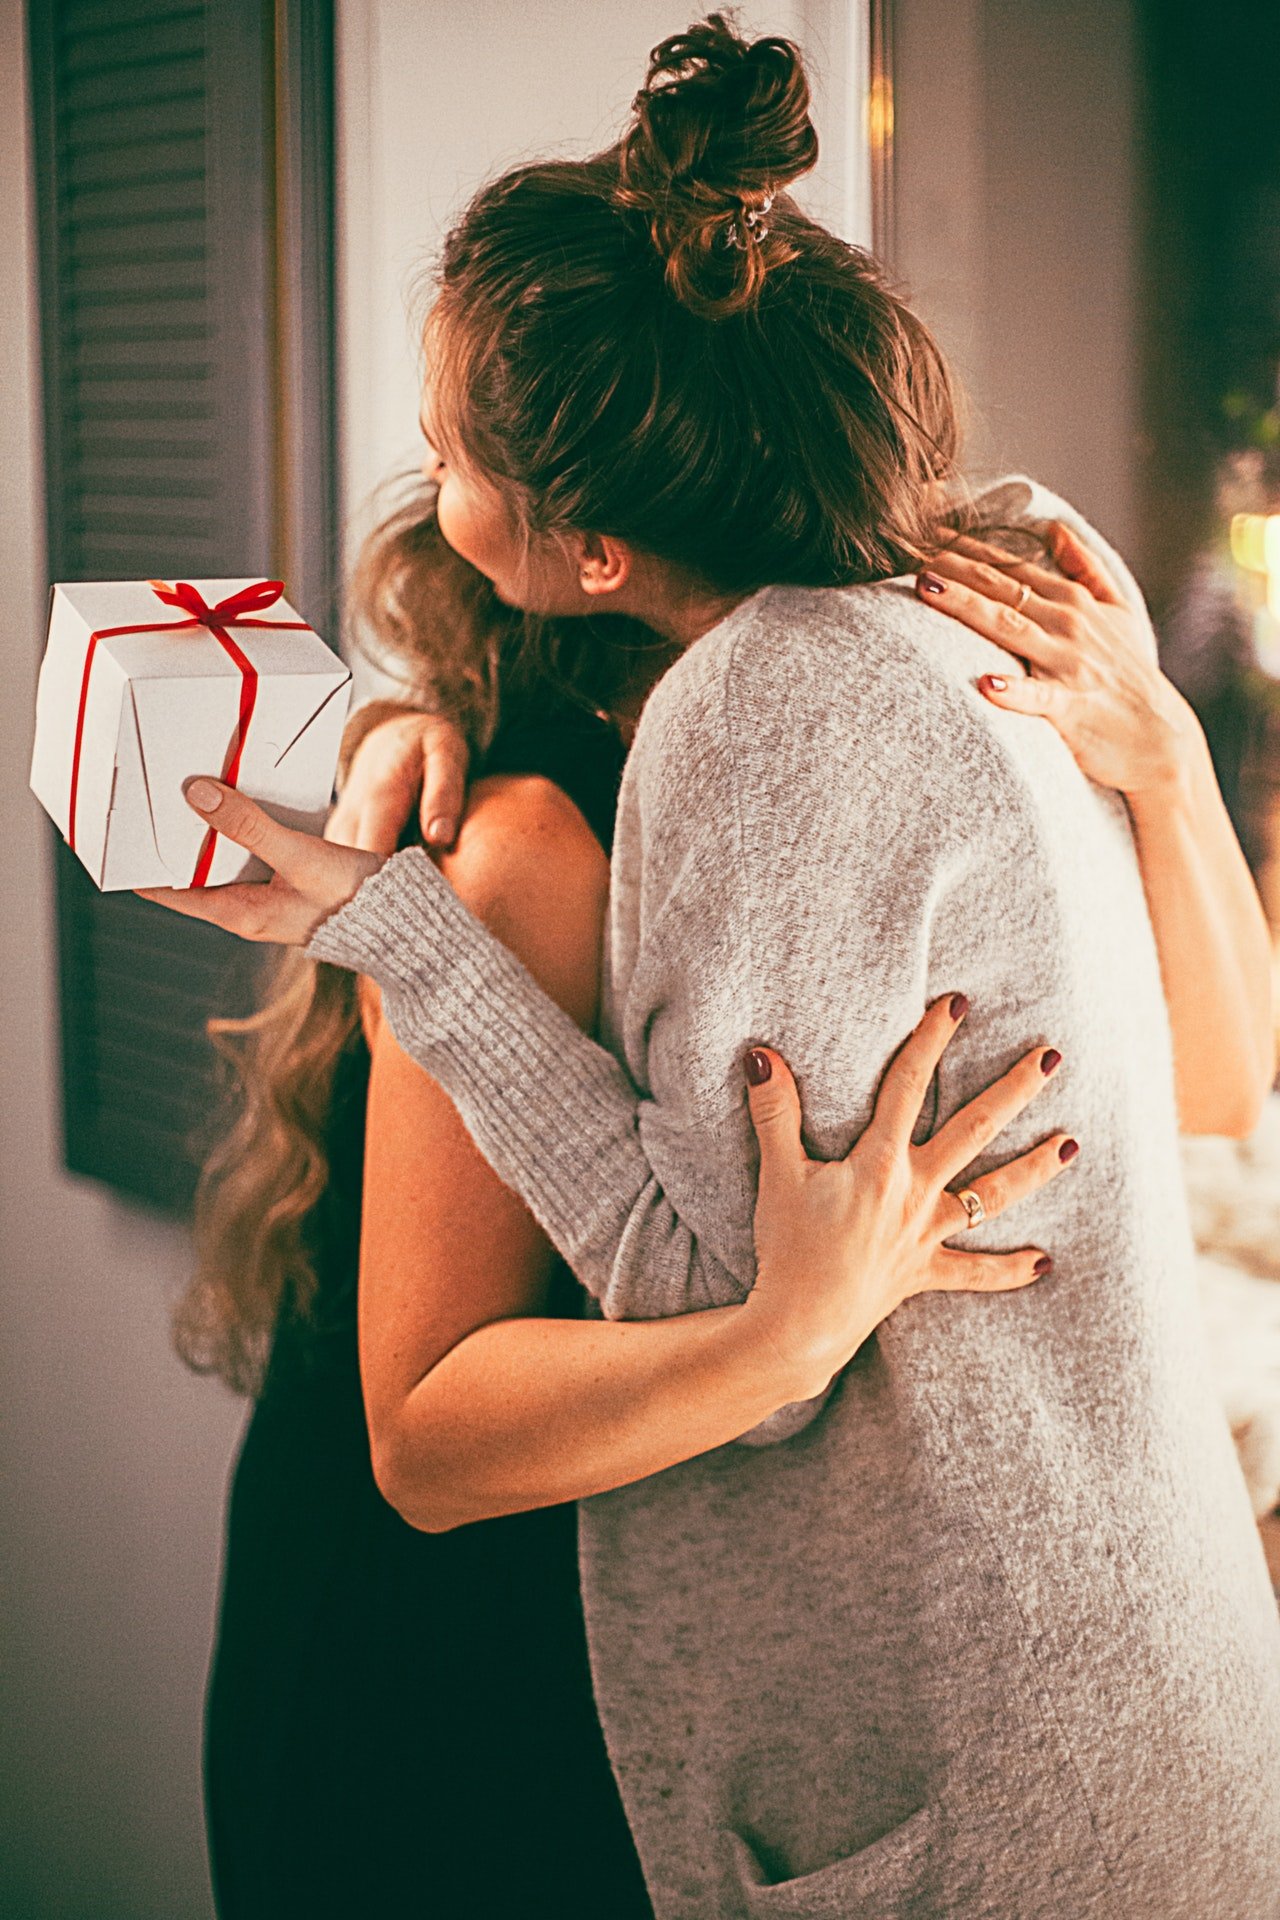 We hugged, and they gave me the presents they brought from the trip. | Source: Pexels